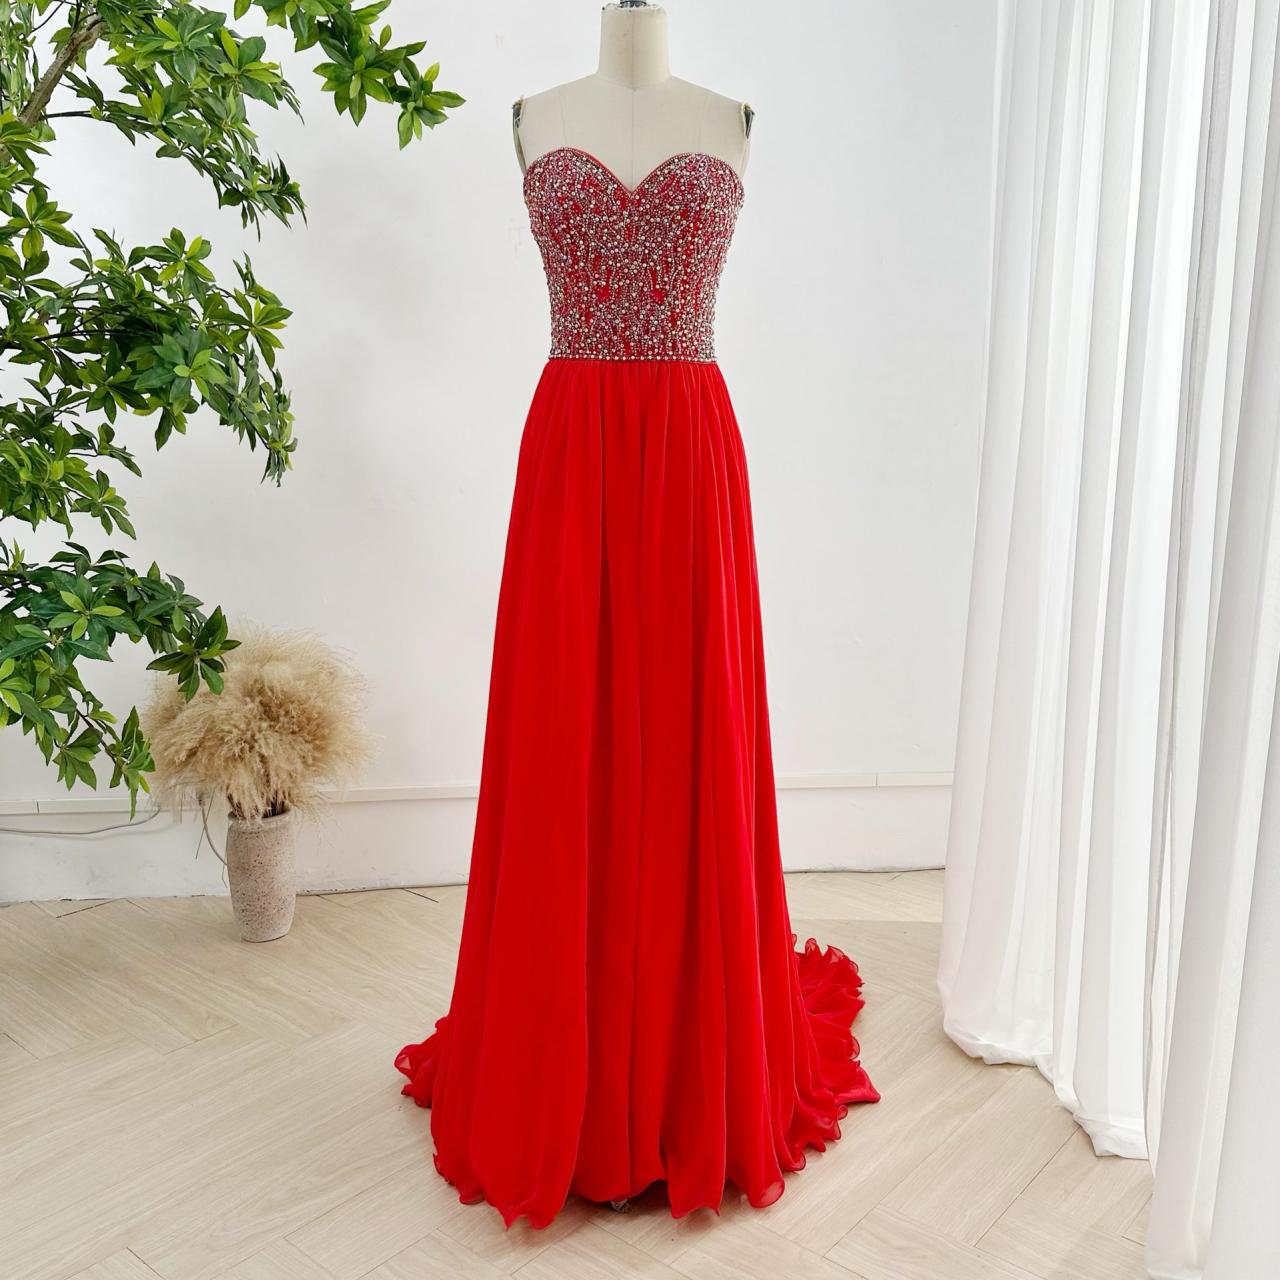 Sweetheart Neckline Long Red Chiffon Prom Dress With Beaded Bodice